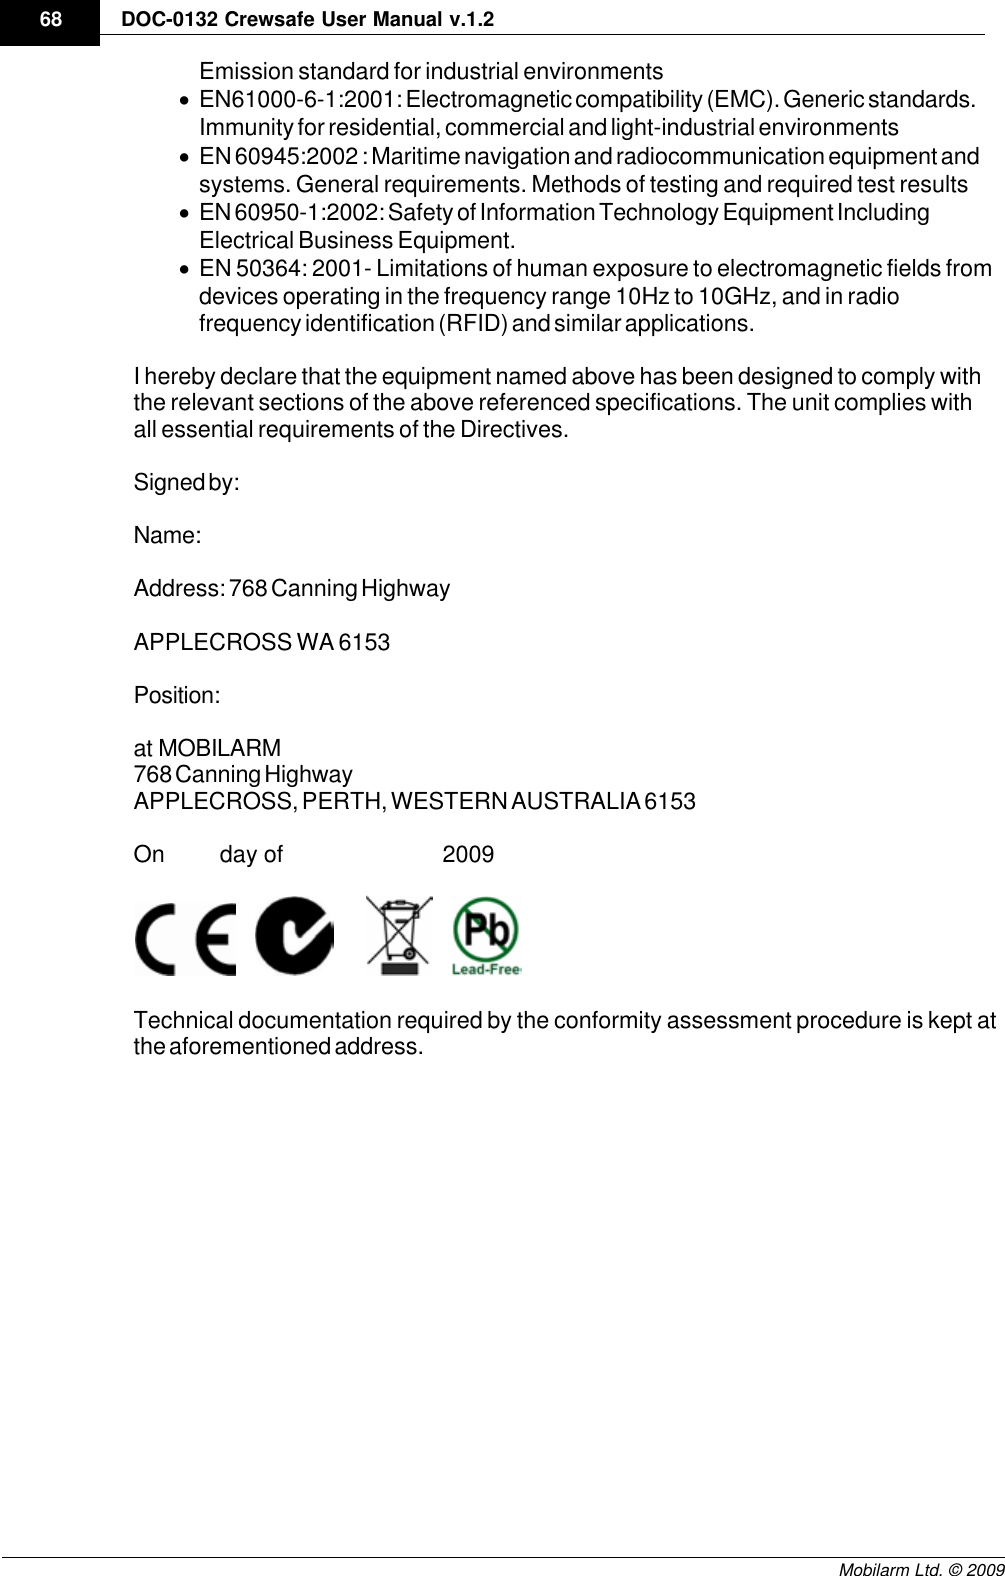 Draft68 DOC-0132 Crewsafe User Manual v.1.2Mobilarm Ltd. © 2009Emission standard for industrial environments ·EN61000-6-1:2001: Electromagnetic compatibility (EMC). Generic standards.Immunity for residential, commercial and light-industrial environments ·EN 60945:2002 : Maritime navigation and radiocommunication equipment andsystems. General requirements. Methods of testing and required test results·EN 60950-1:2002: Safety of Information Technology Equipment IncludingElectrical Business Equipment. ·EN 50364: 2001- Limitations of human exposure to electromagnetic fields fromdevices operating in the frequency range 10Hz to 10GHz, and in radiofrequency identification (RFID) and similar applications. I hereby declare that the equipment named above has been designed to comply withthe relevant sections of the above referenced specifications. The unit complies withall essential requirements of the Directives.Signed by:Name: Address: 768 Canning HighwayAPPLECROSS WA 6153Position:at  MOBILARM768 Canning HighwayAPPLECROSS, PERTH, WESTERN AUSTRALIA 6153On         day of                          2009             Technical documentation required by the conformity assessment procedure is kept atthe aforementioned address.